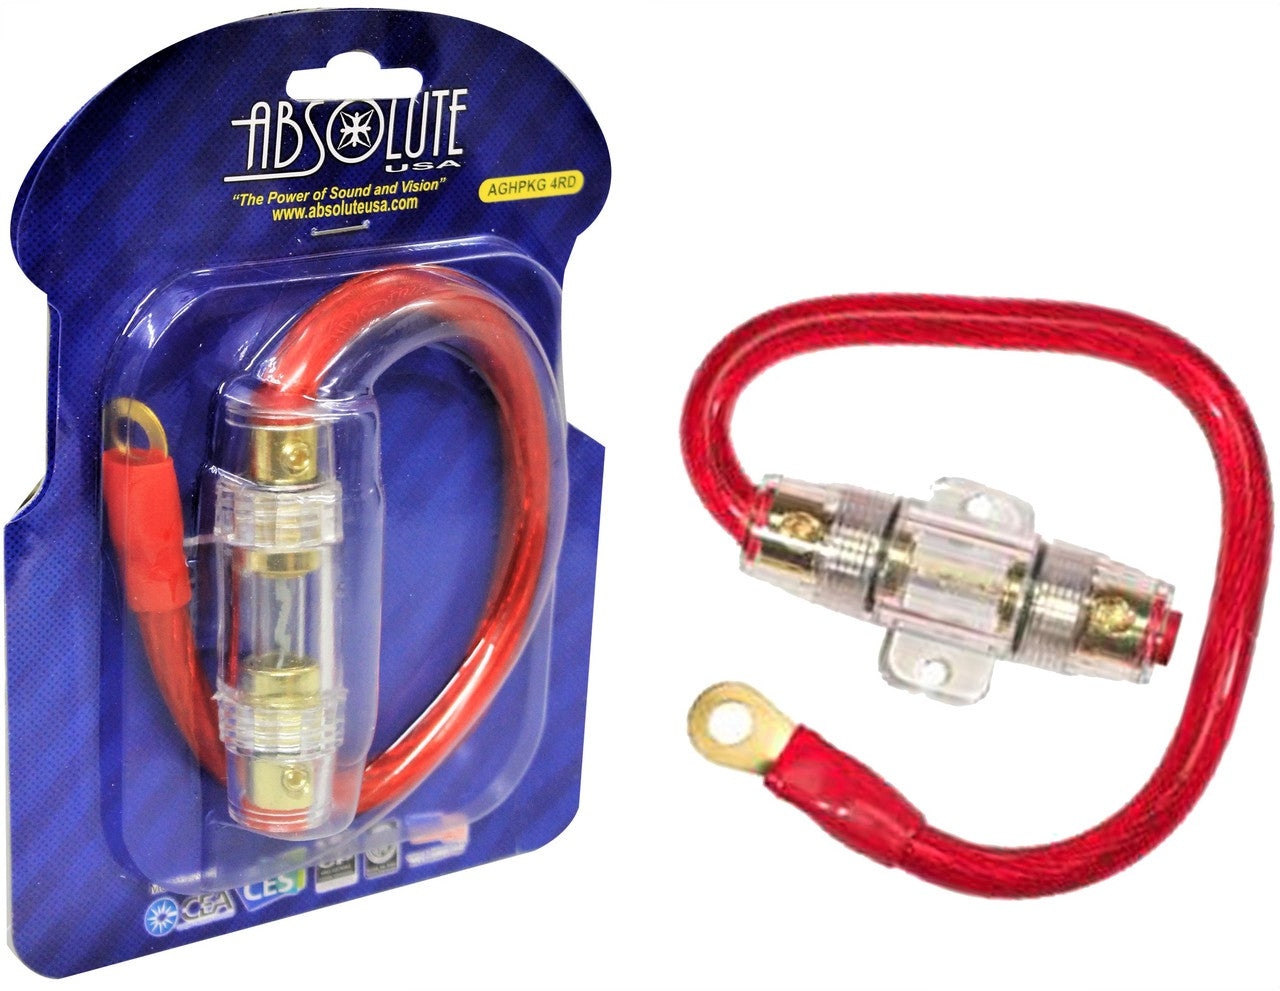 4 Gauge Red Power Cable and In-Line Fuse Kit with 60A Fuse and Ring Terminal